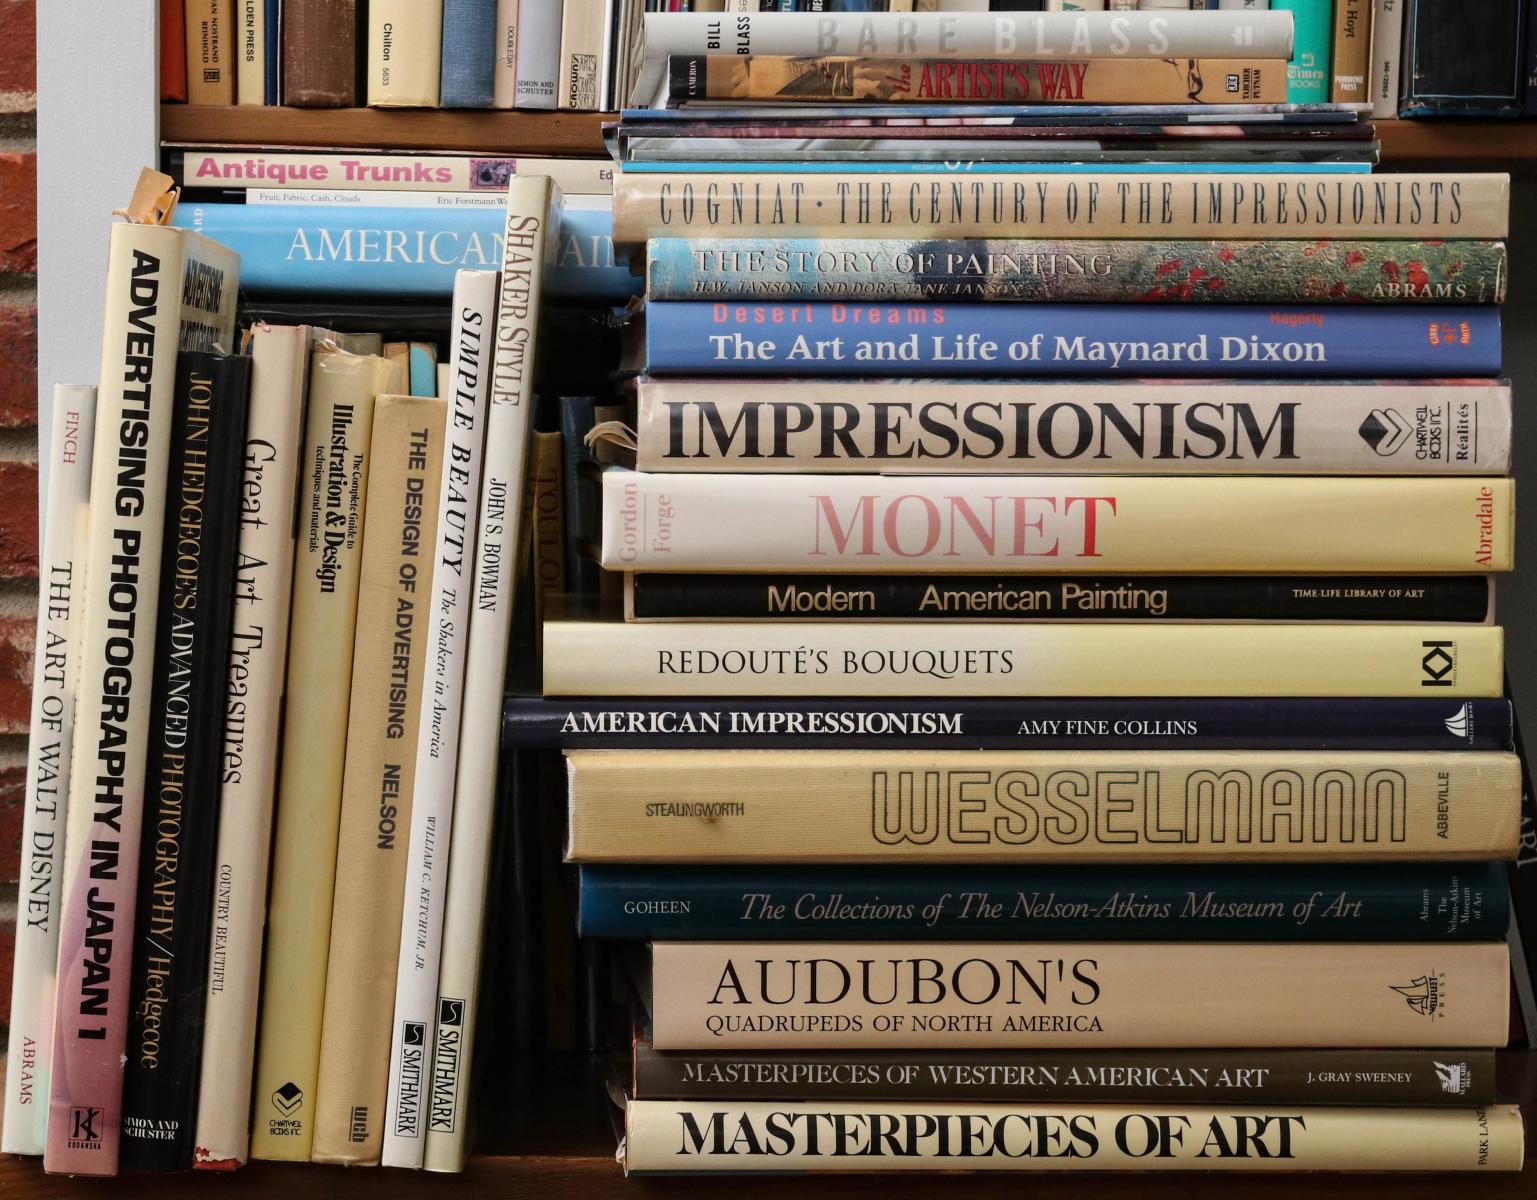 A SHELF OF BOOKS, MOSTLY FINE ART AND ART STYLES